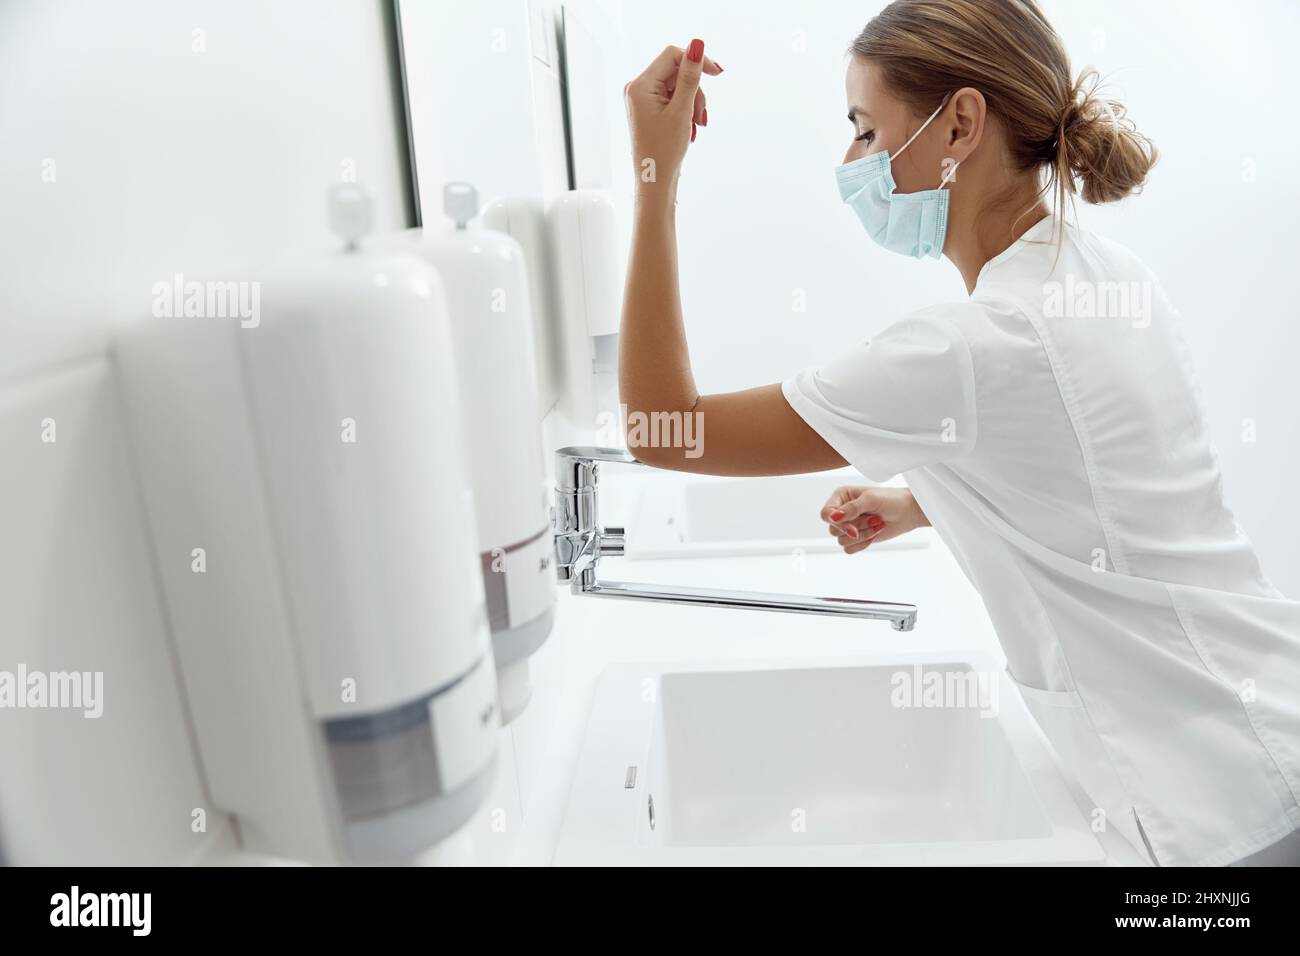 woman closes the water tap with her elbow Stock Photo